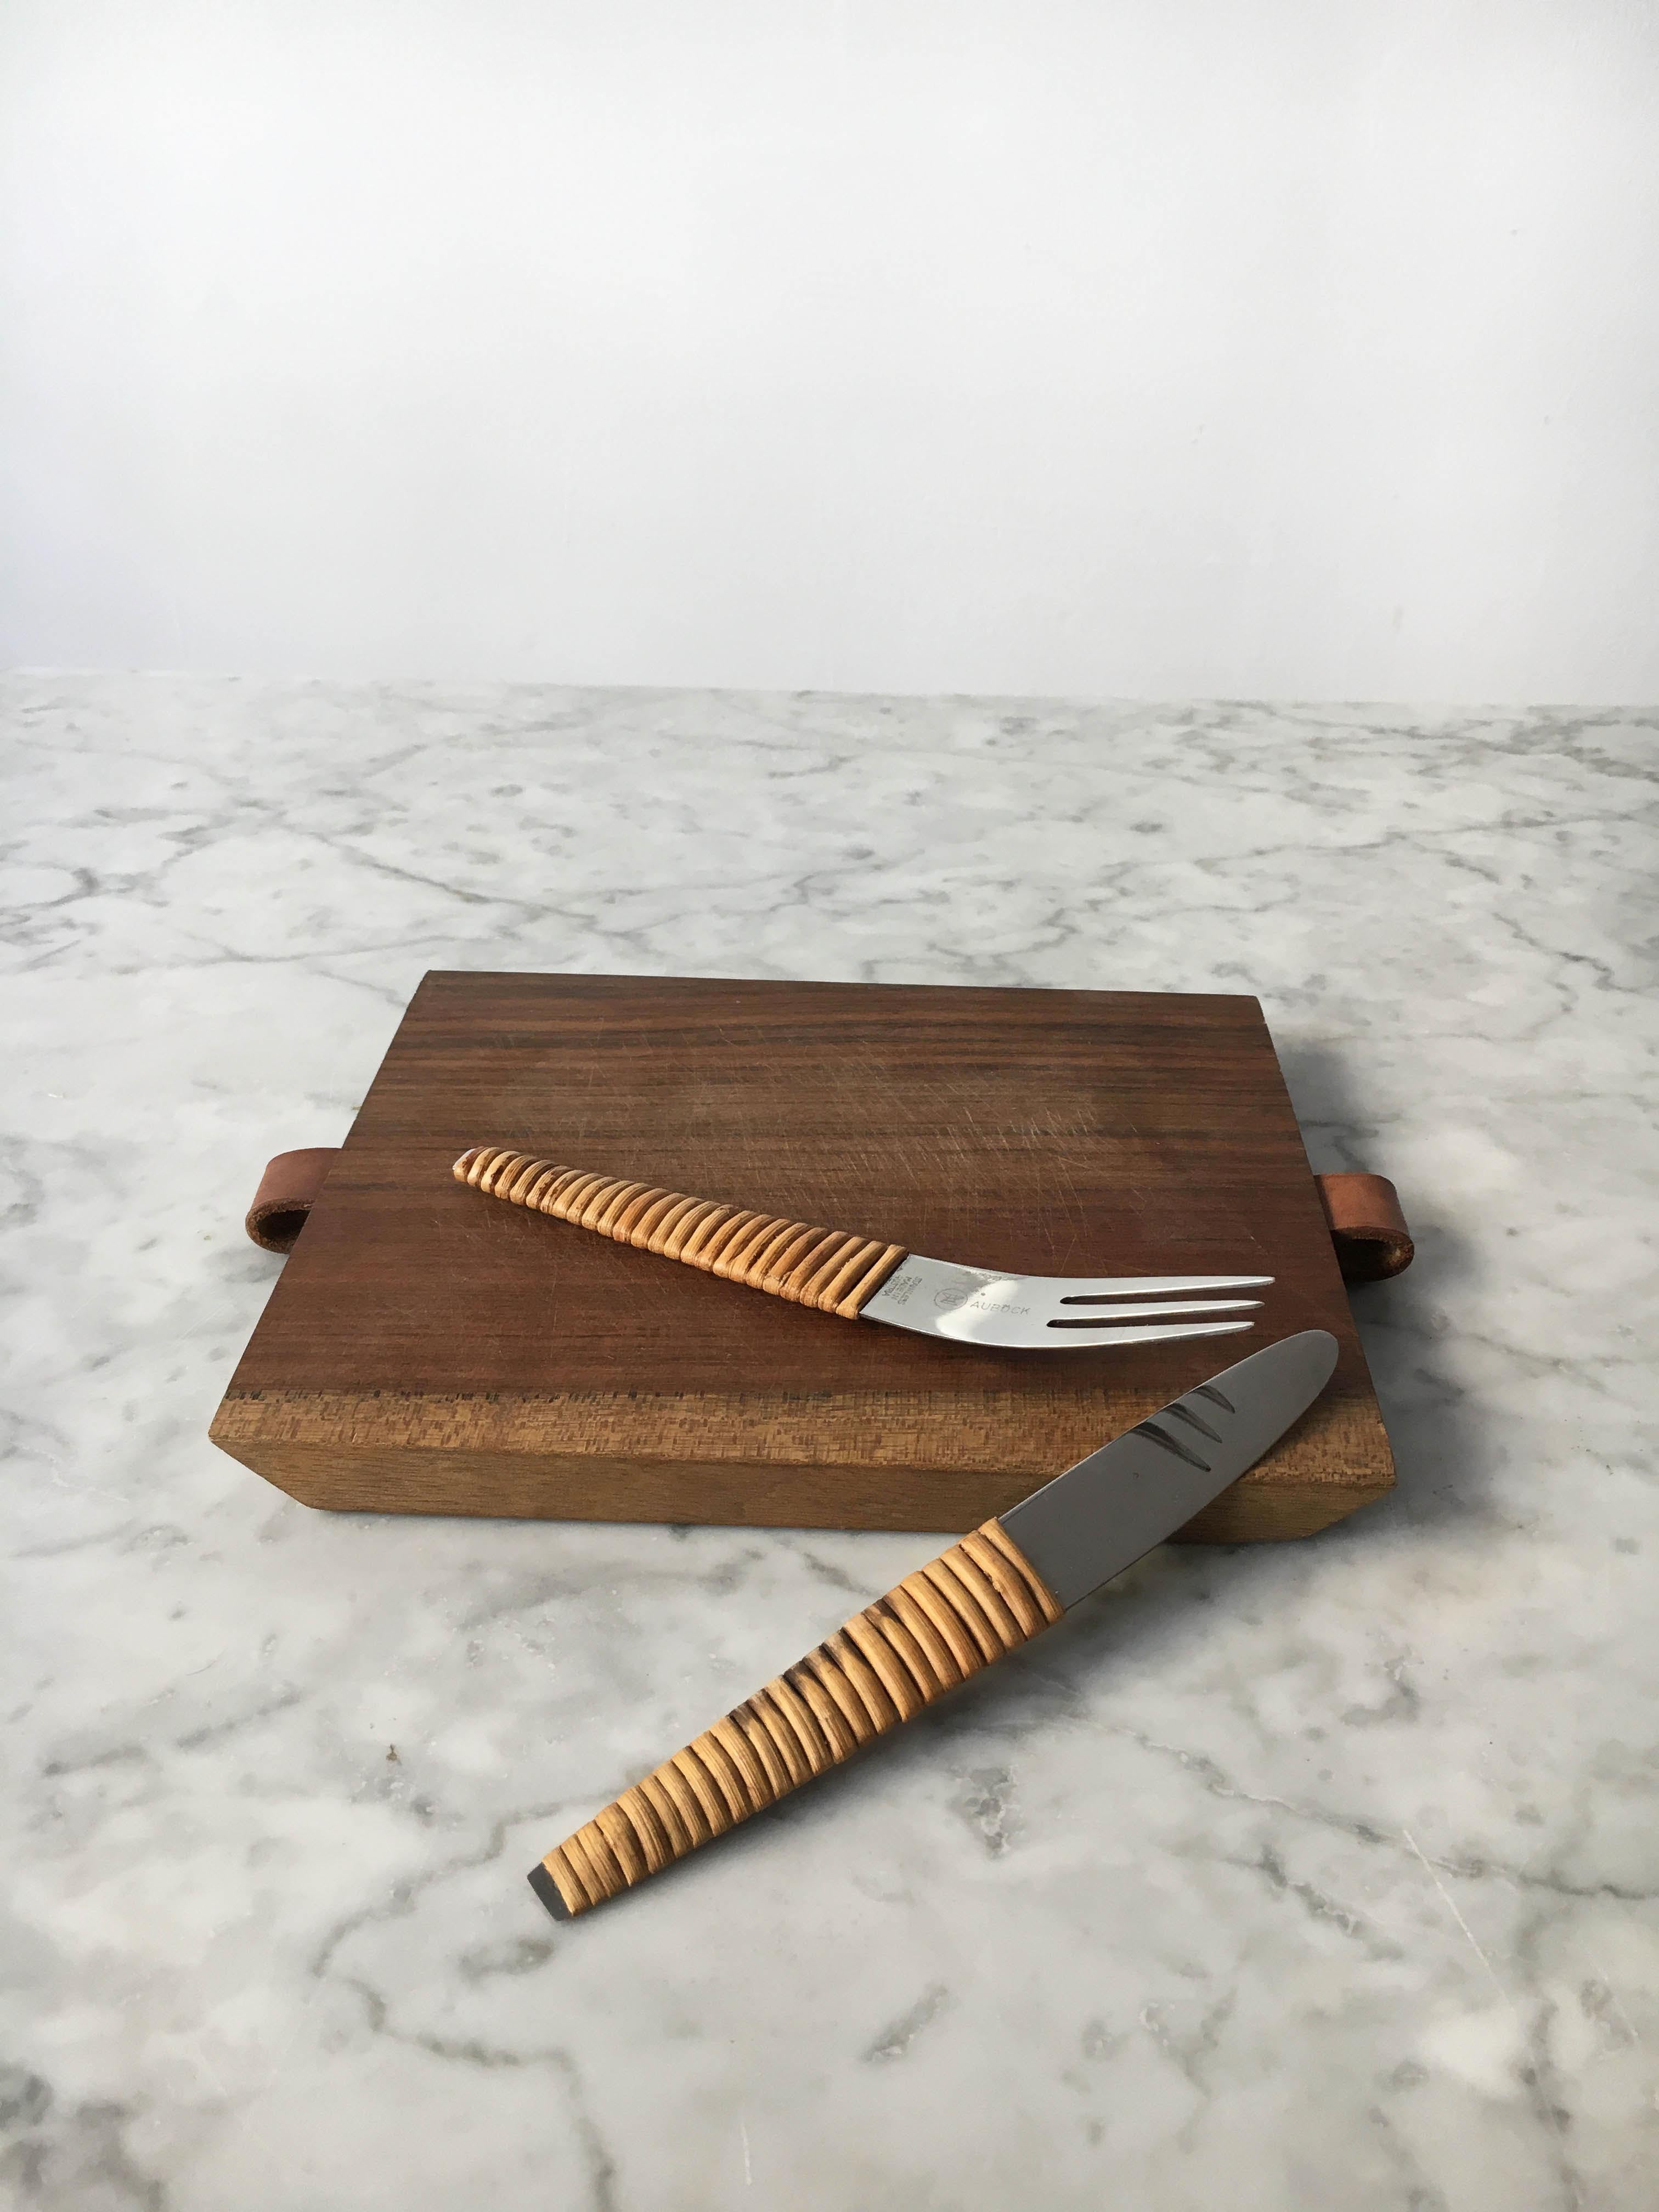 Carl Auböck Picnic Board with Knife and Fork, Austria, 1950s For Sale 1